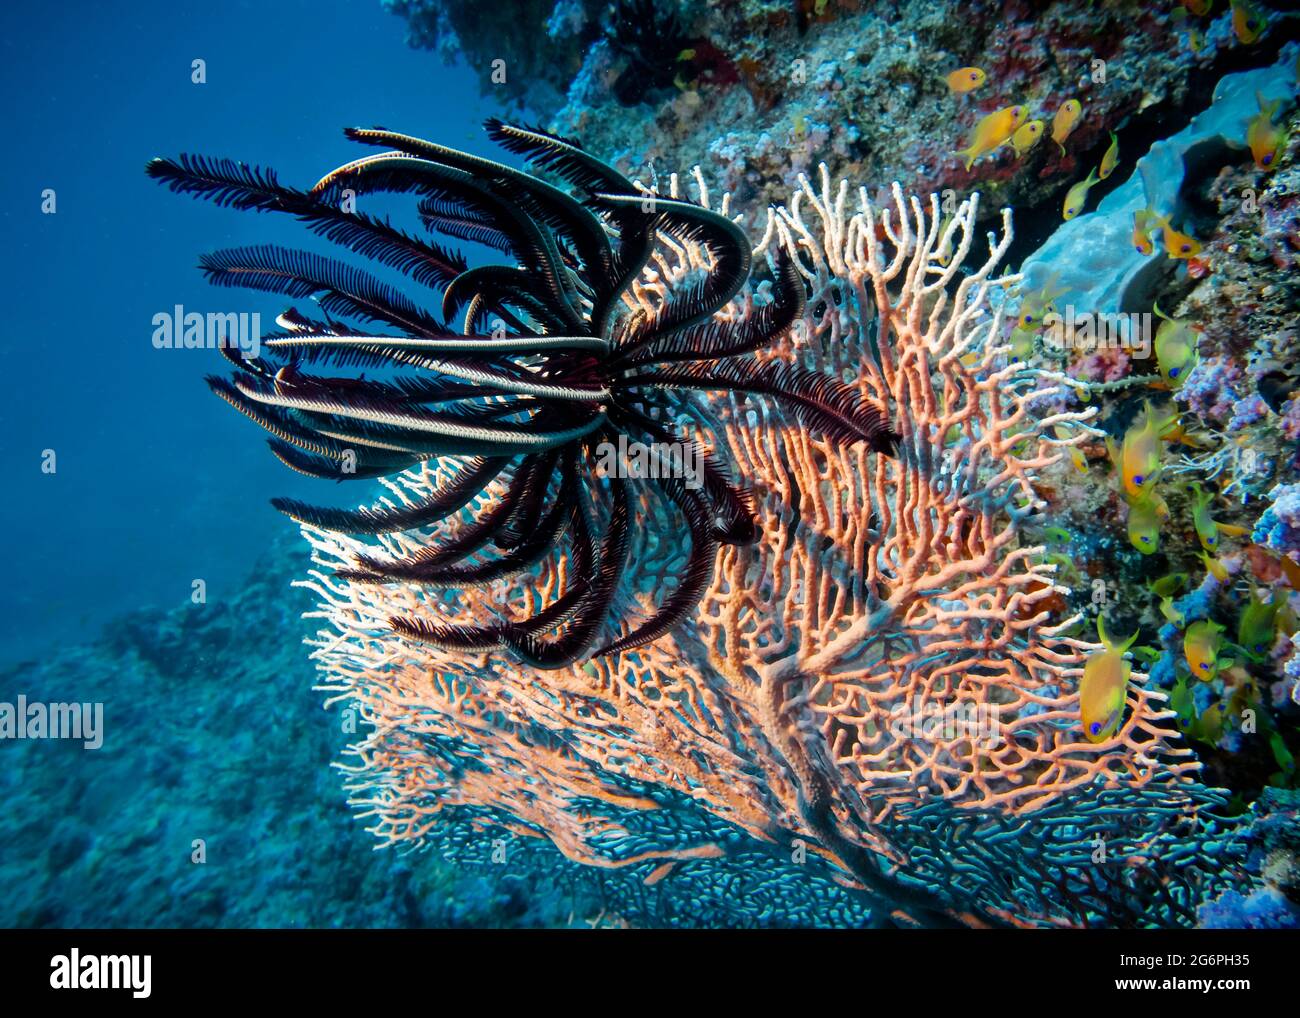 Black Sea Lily on red coral Gorgonaria on the bottom of the Indian Ocean Stock Photo